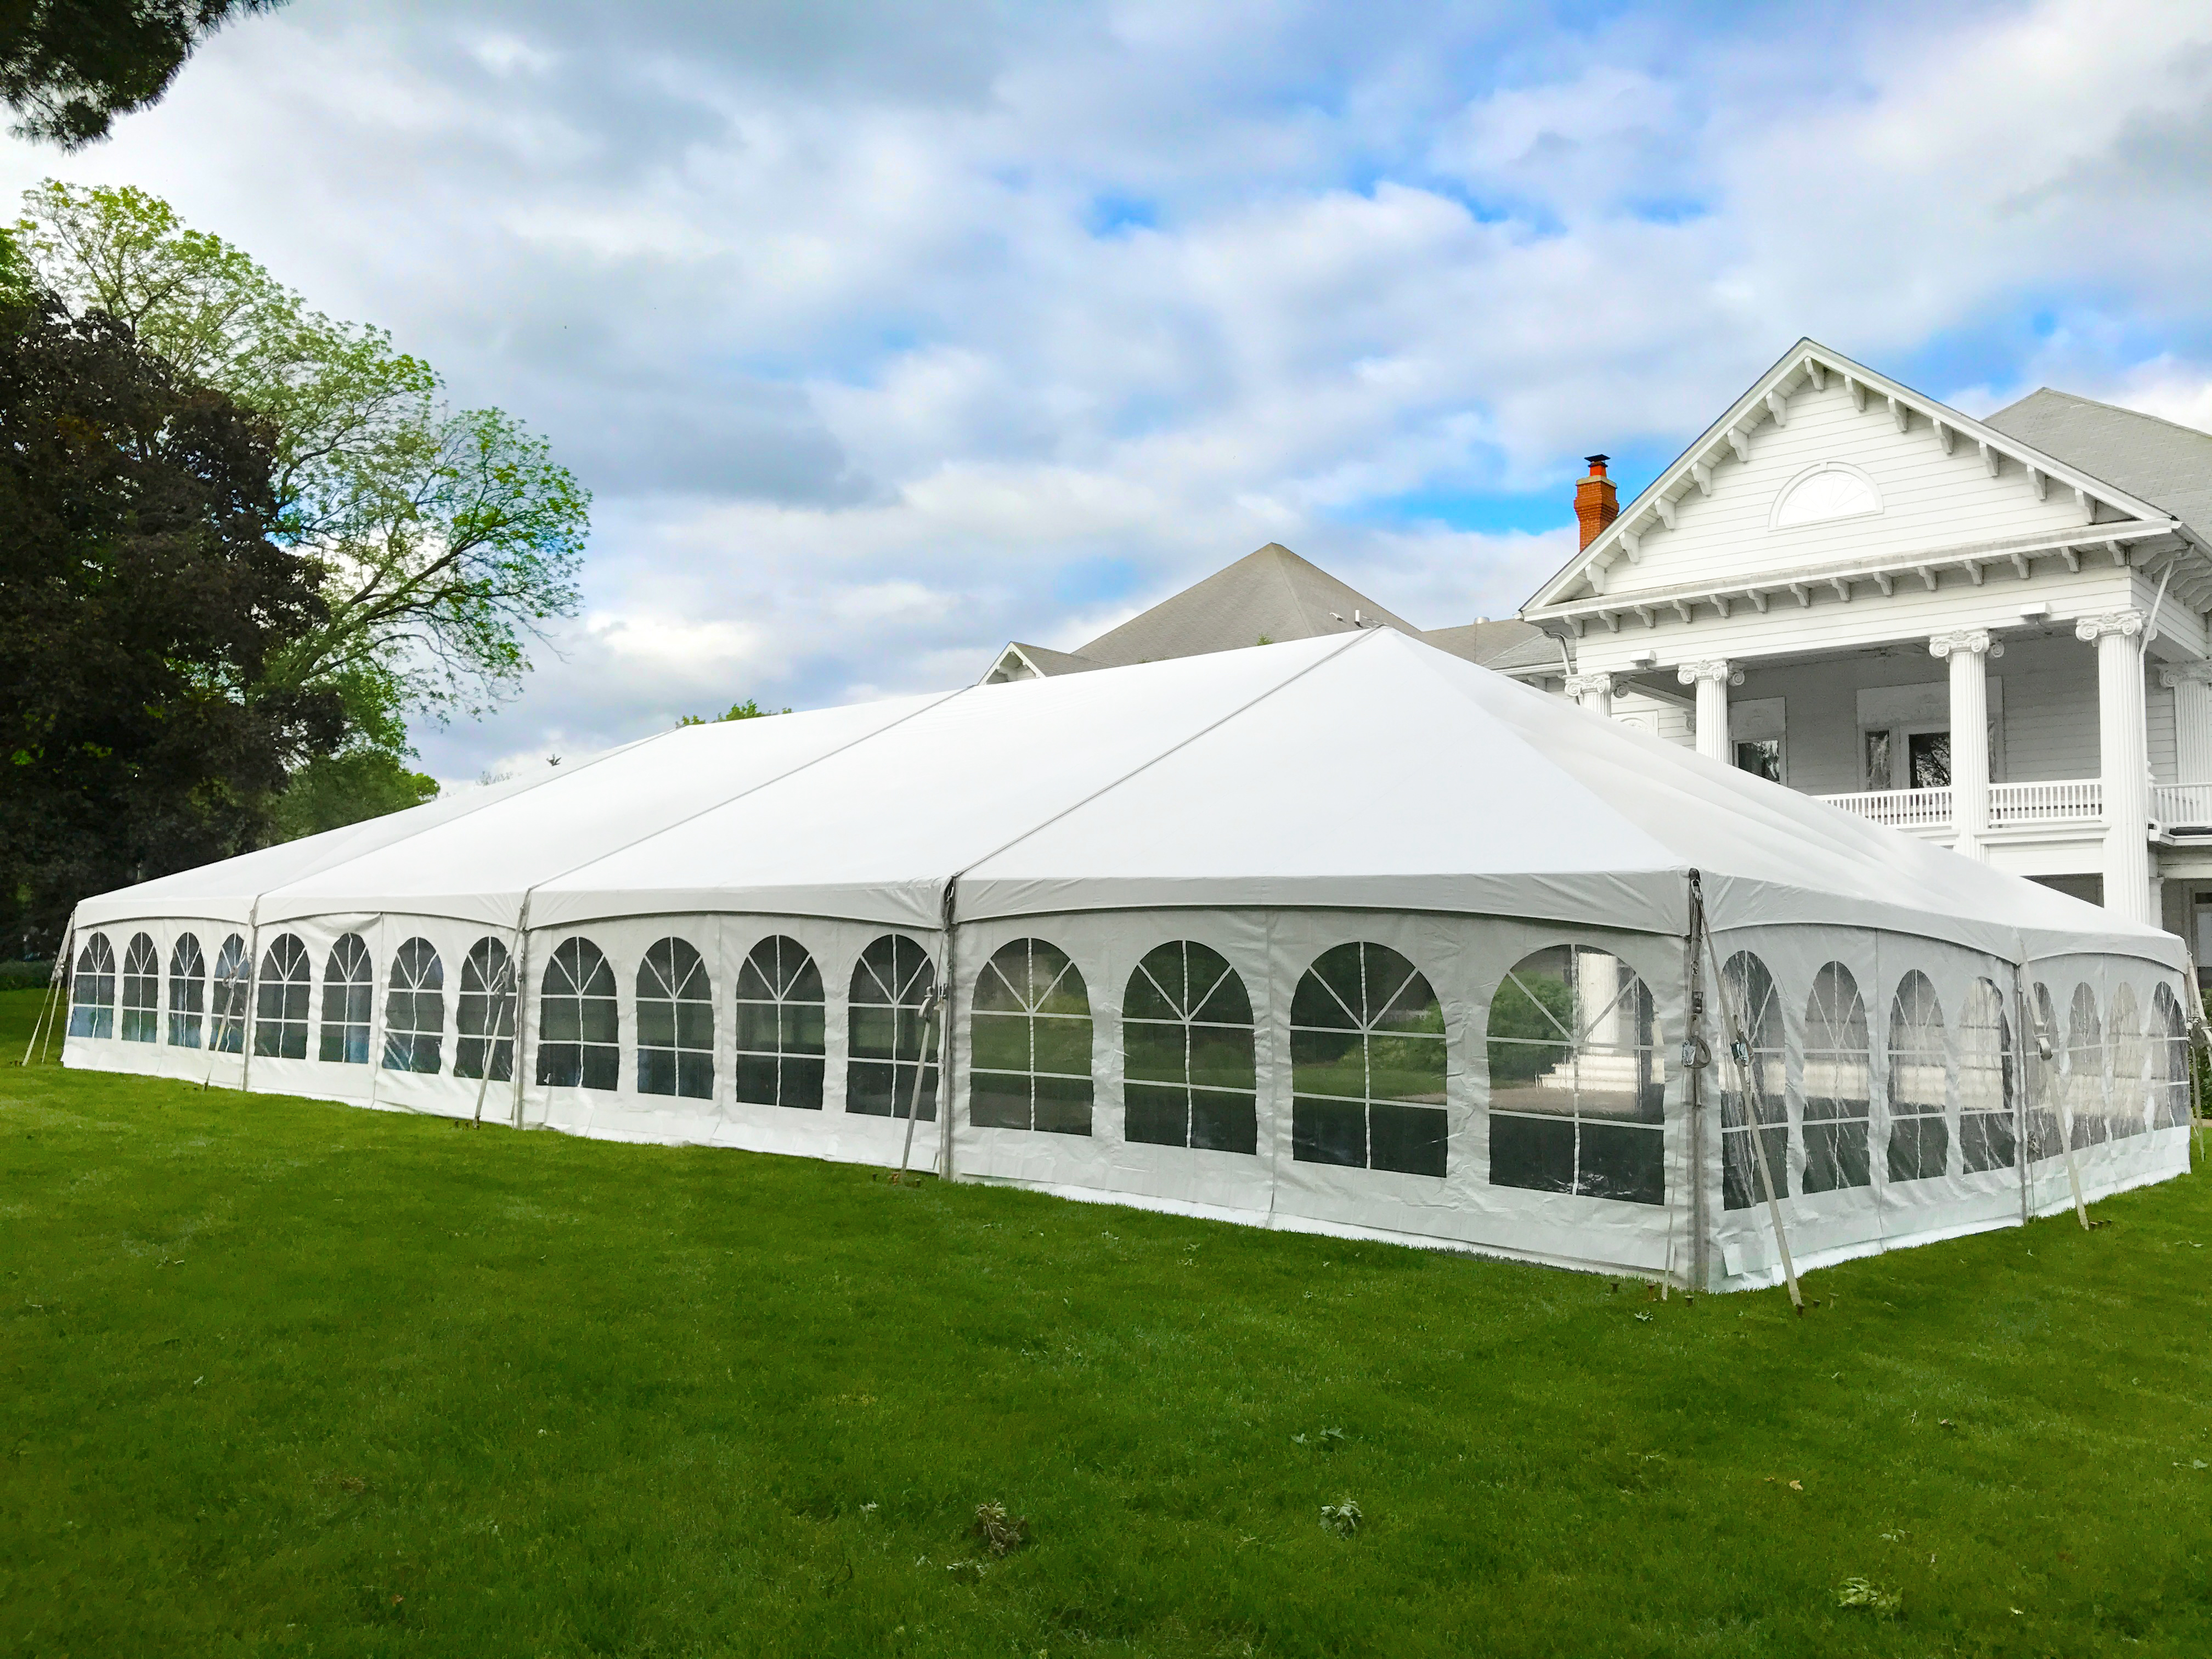 40' x 80' Hybrid event tent at Outing Club on Brady Street in Davenport, Iowa